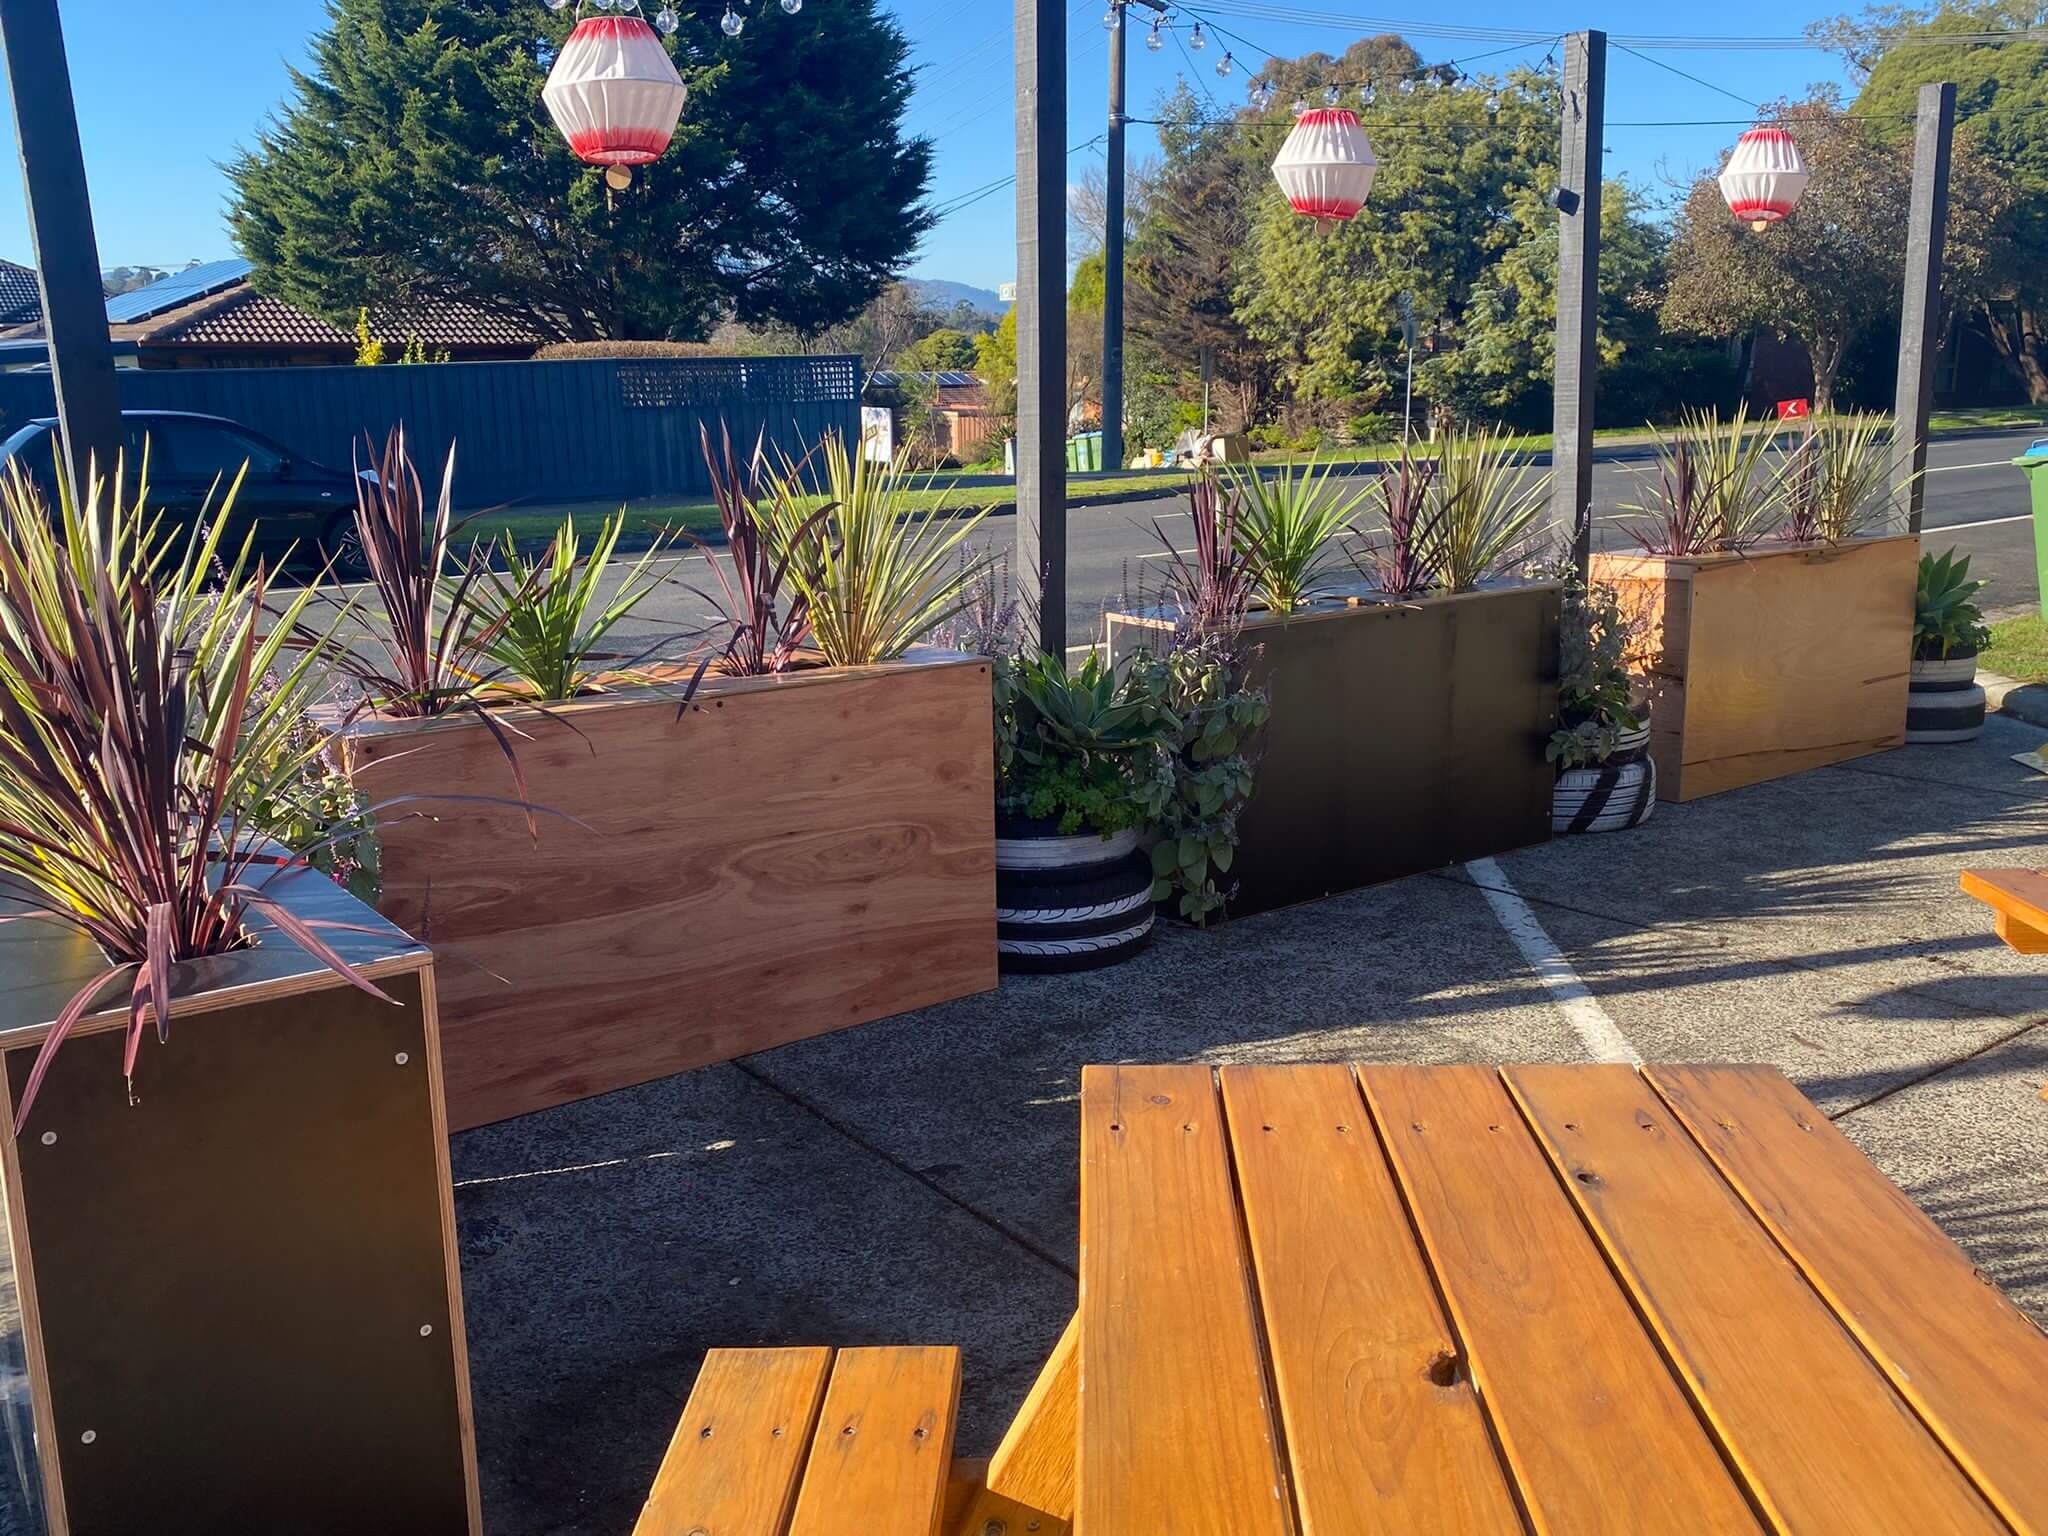 Common Room Planter Boxes, Marine Ply and Black Formply